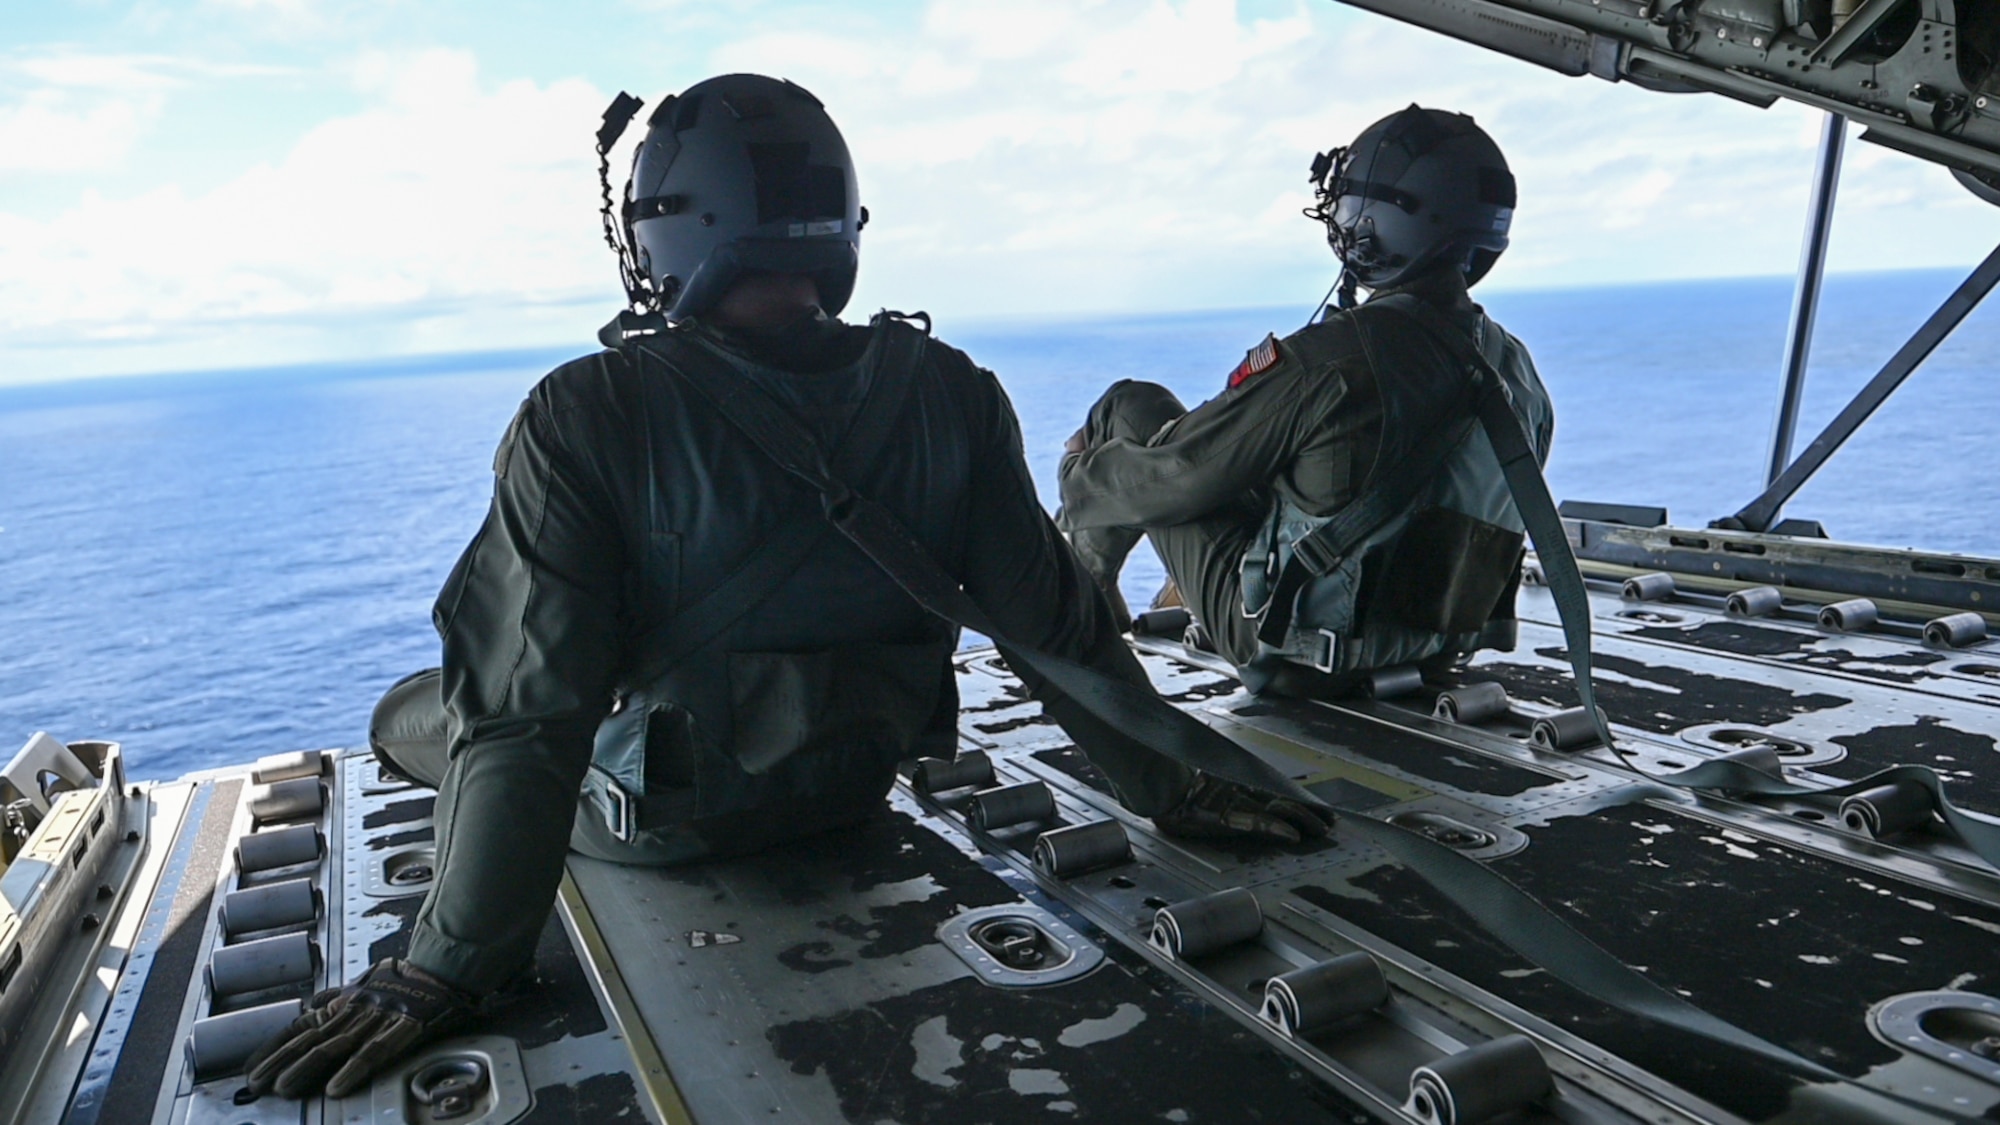 Two Airman sitting on the ramp of a C-130.